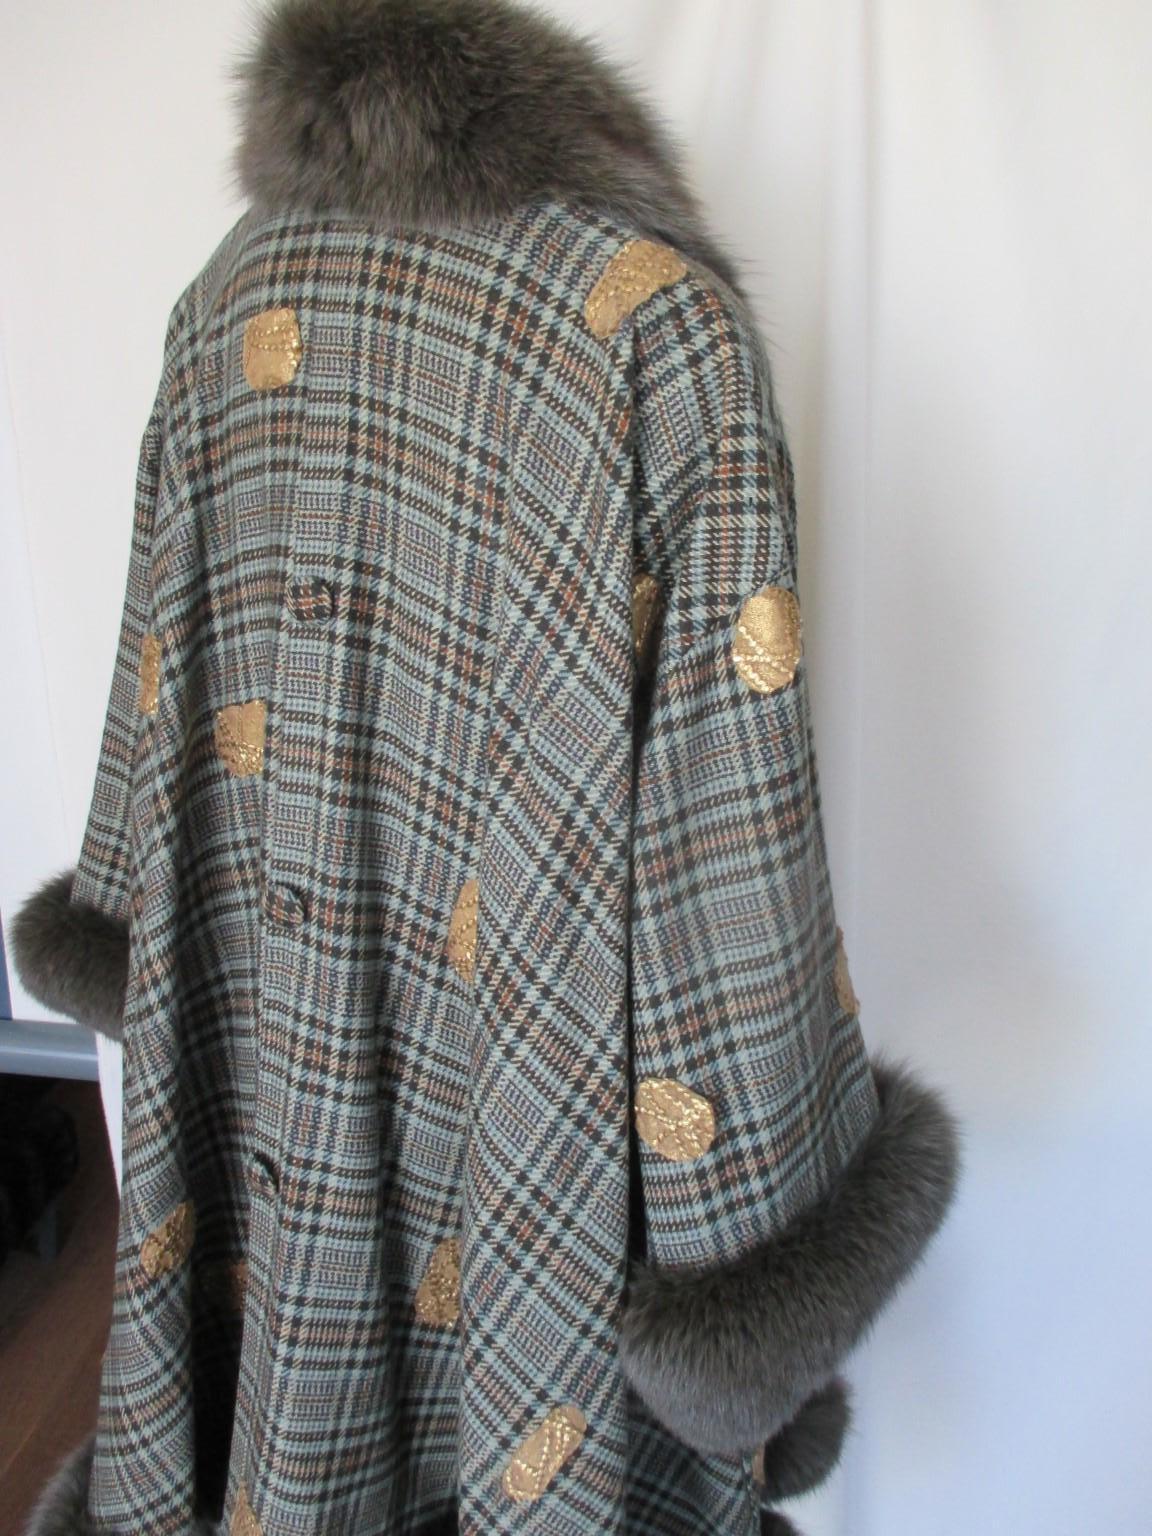  Hippy Chic Checked Wool Fox Fur Stole Cape For Sale 1